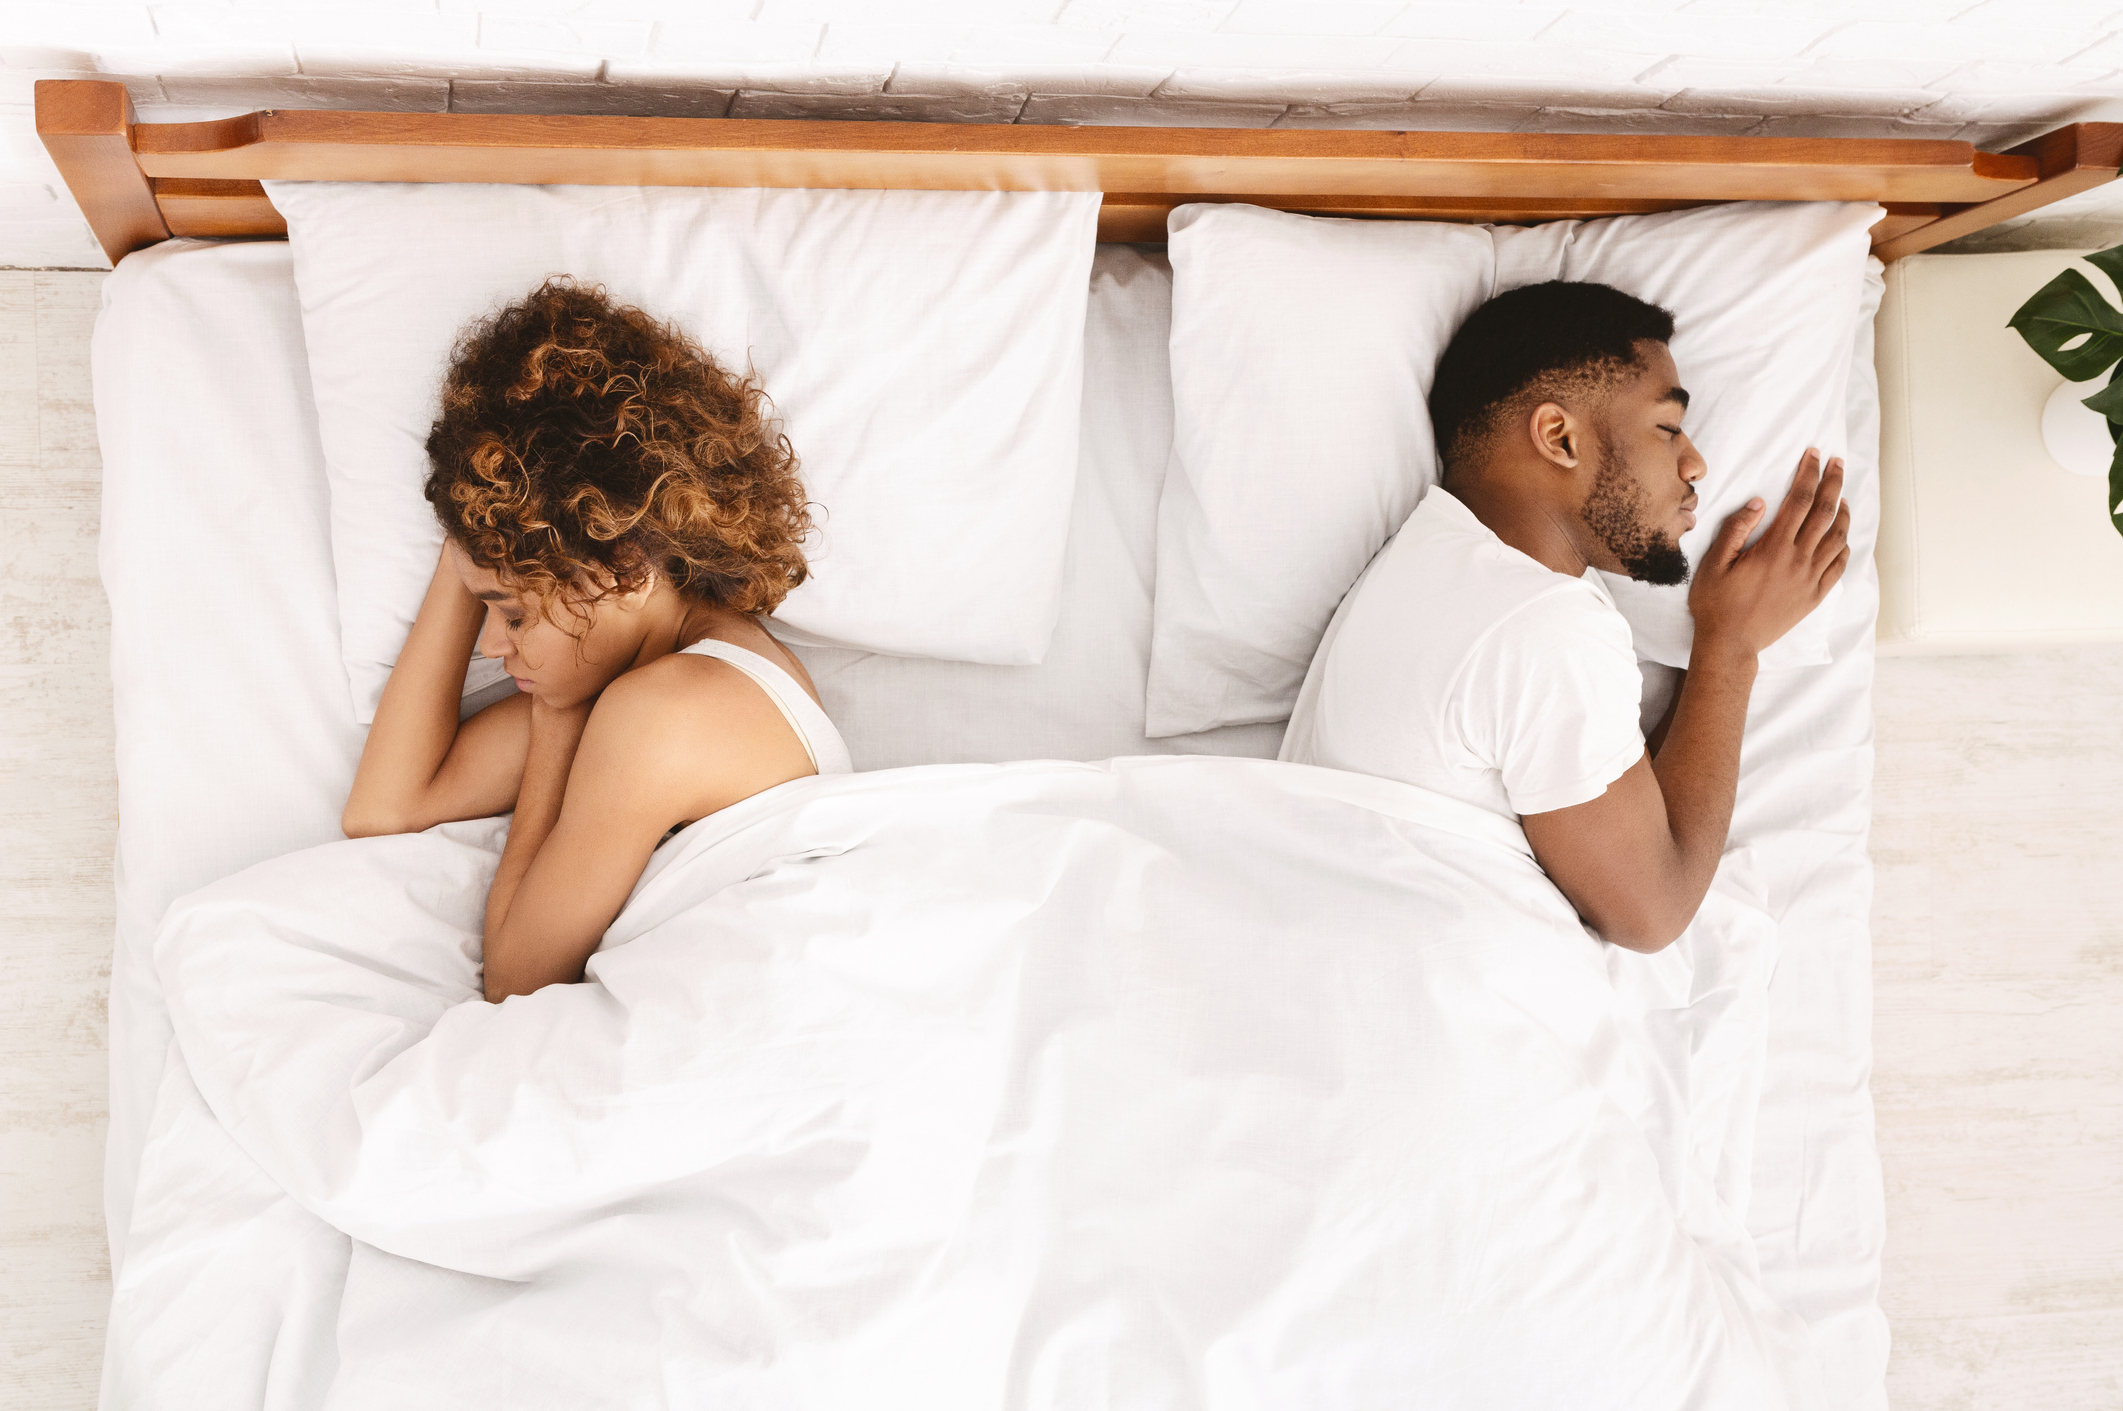 Scientists find a new reason to avoid sharing a bed with our partners